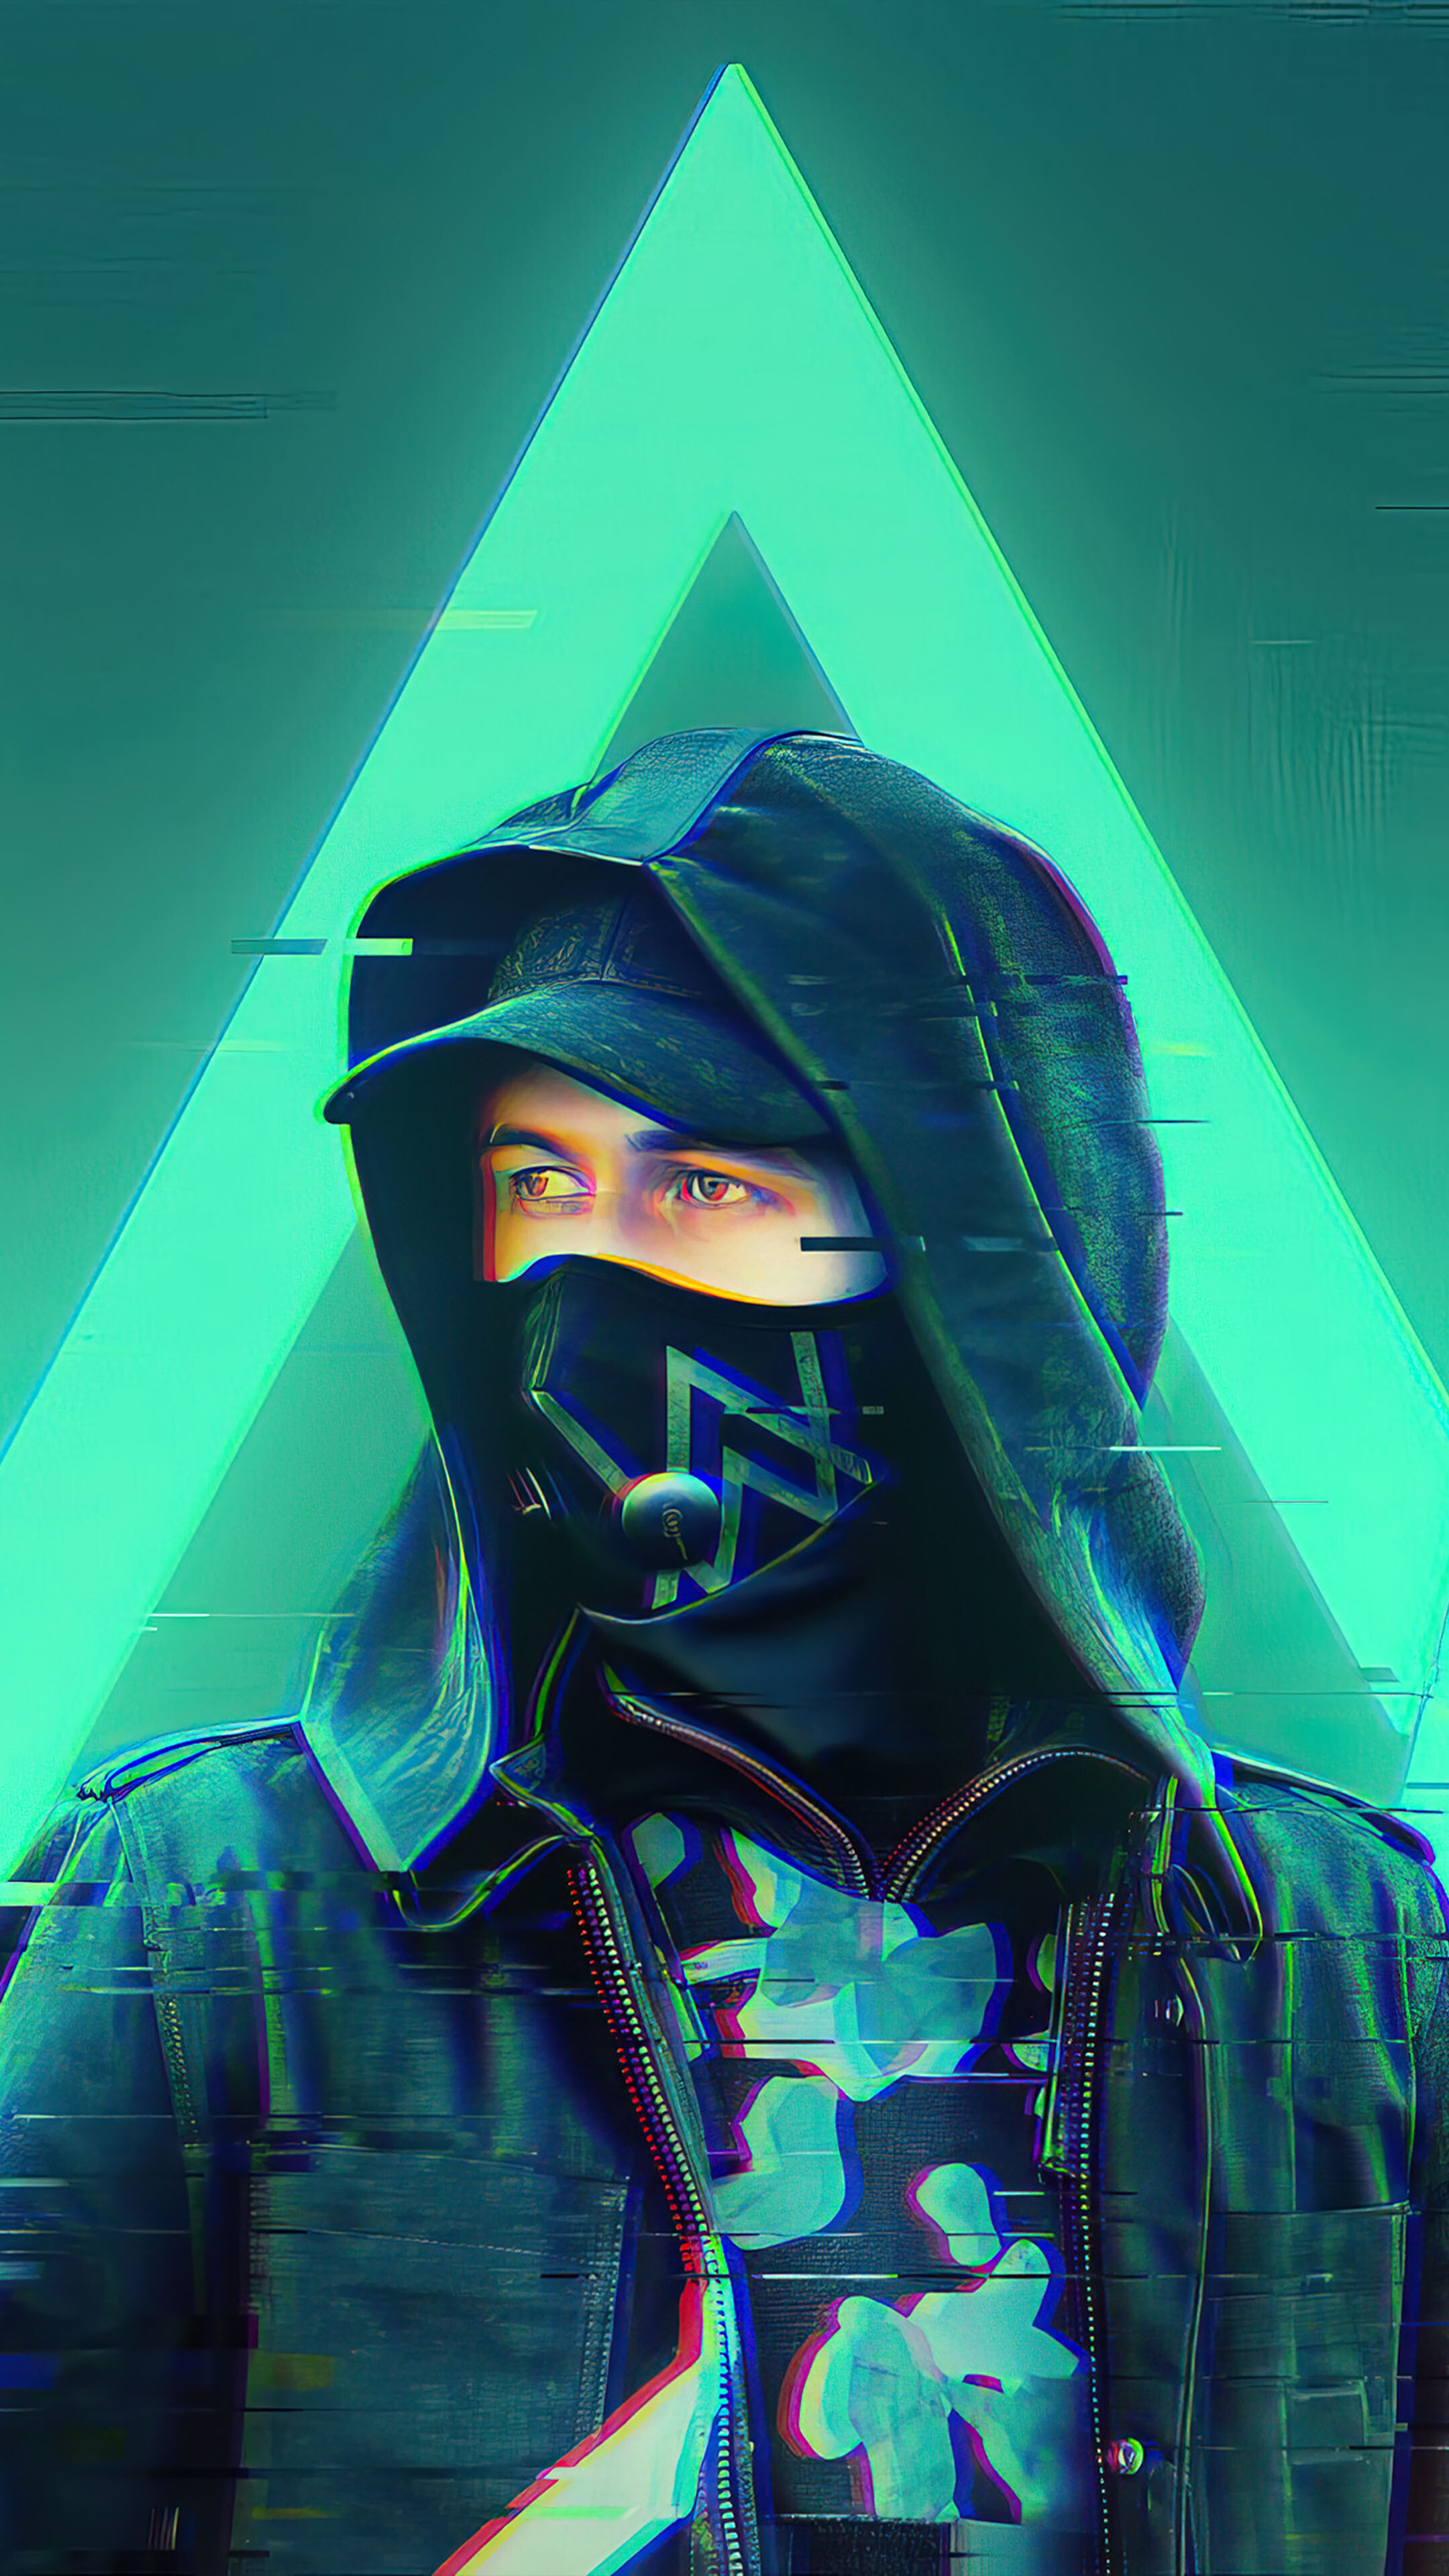 Alan Walker: “Faded”, 2015, Certified platinum in 14 countries. 2160x3840 4K Background.